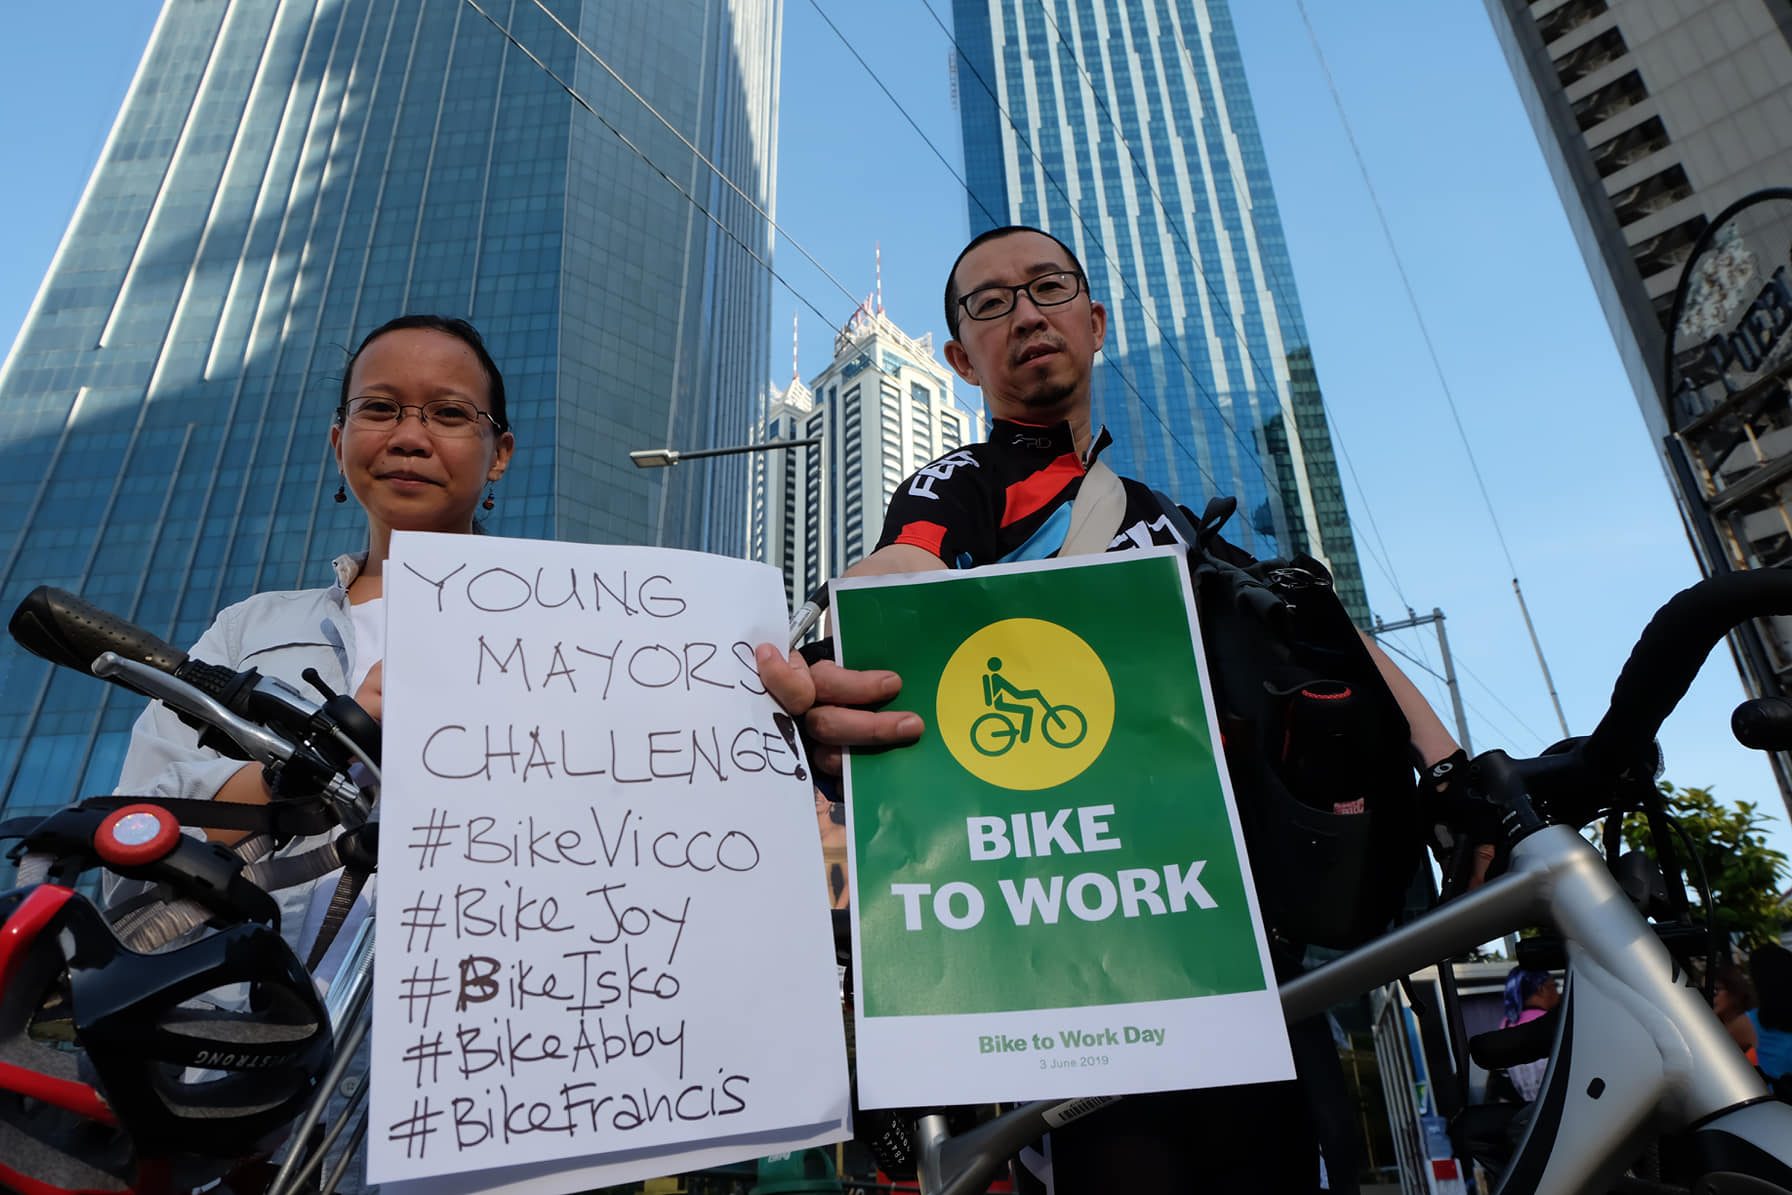 Young metro mayors challenged to make every day World Bike to Work Day